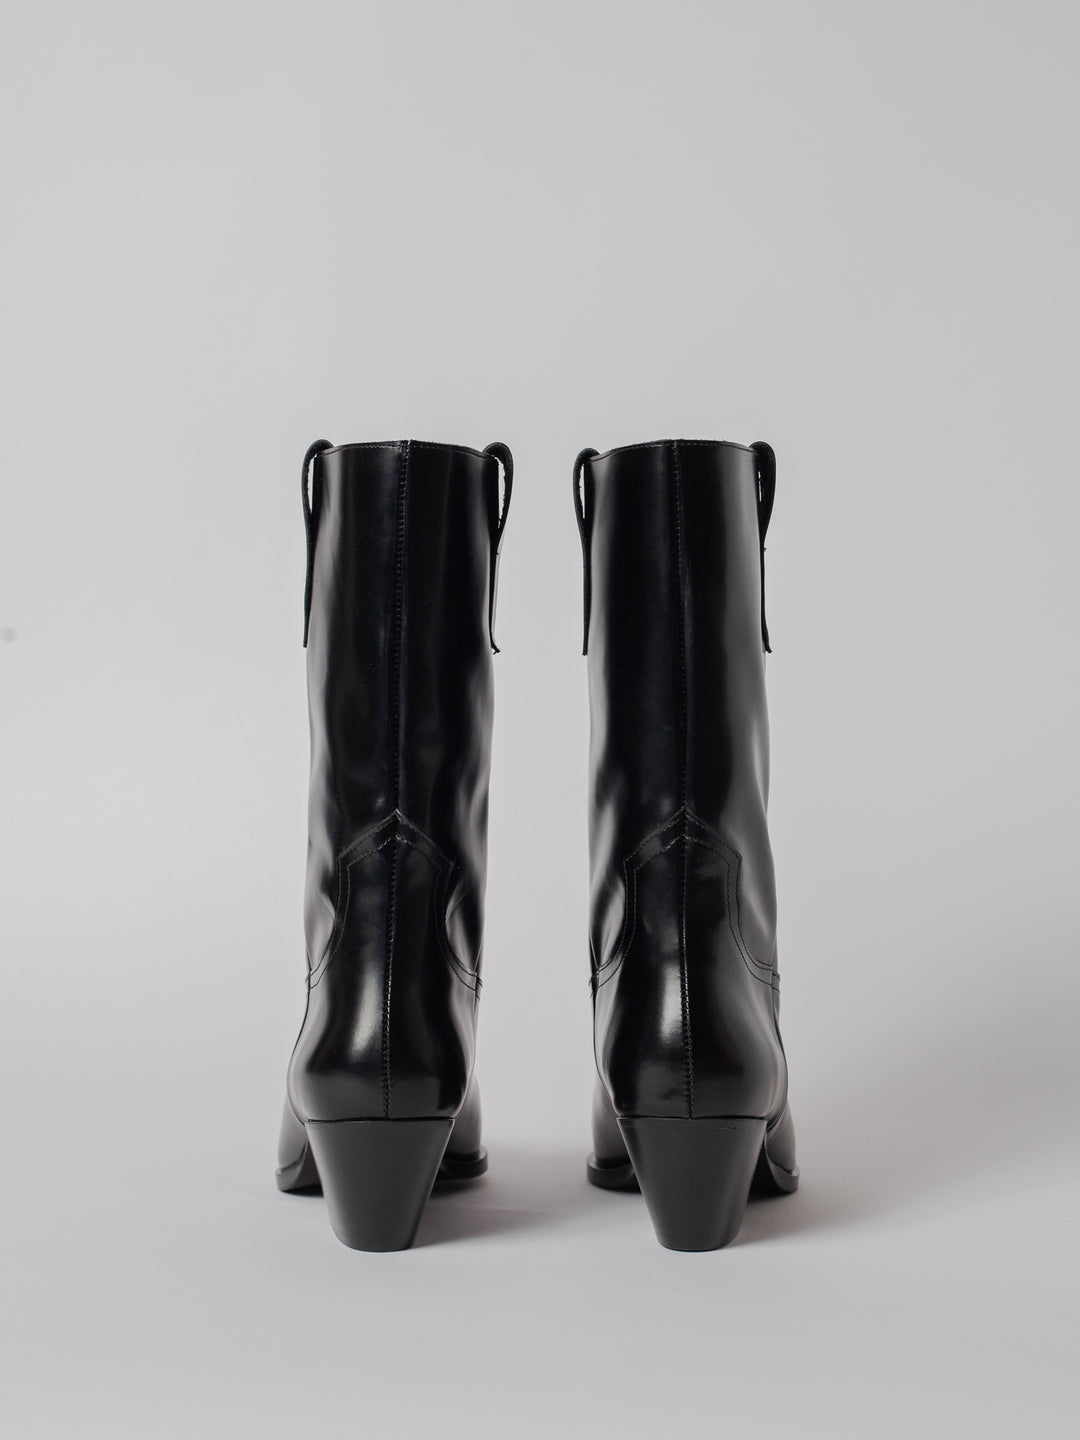 Blankens The Sedona cowboy boot in black leather with pointed toe. Comfortable heel. Fall winter boots. 